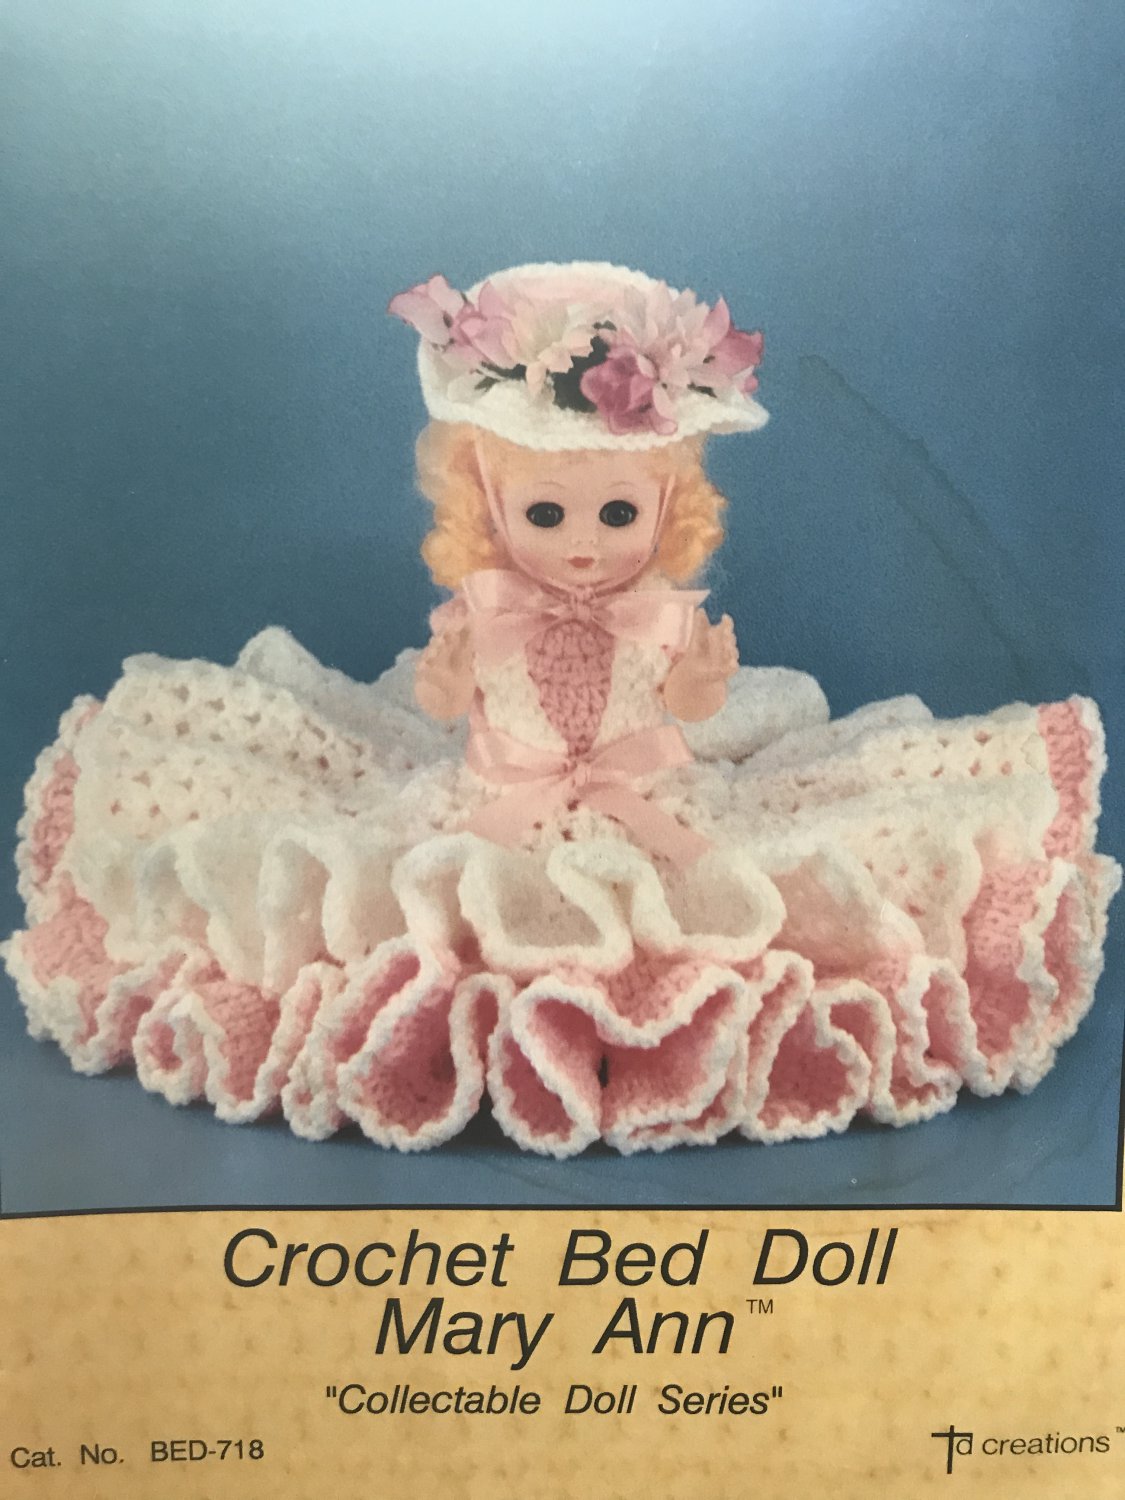 Crochet gown for Bed Doll Mary Ann TD Creations Collectable Doll Series Bed-718